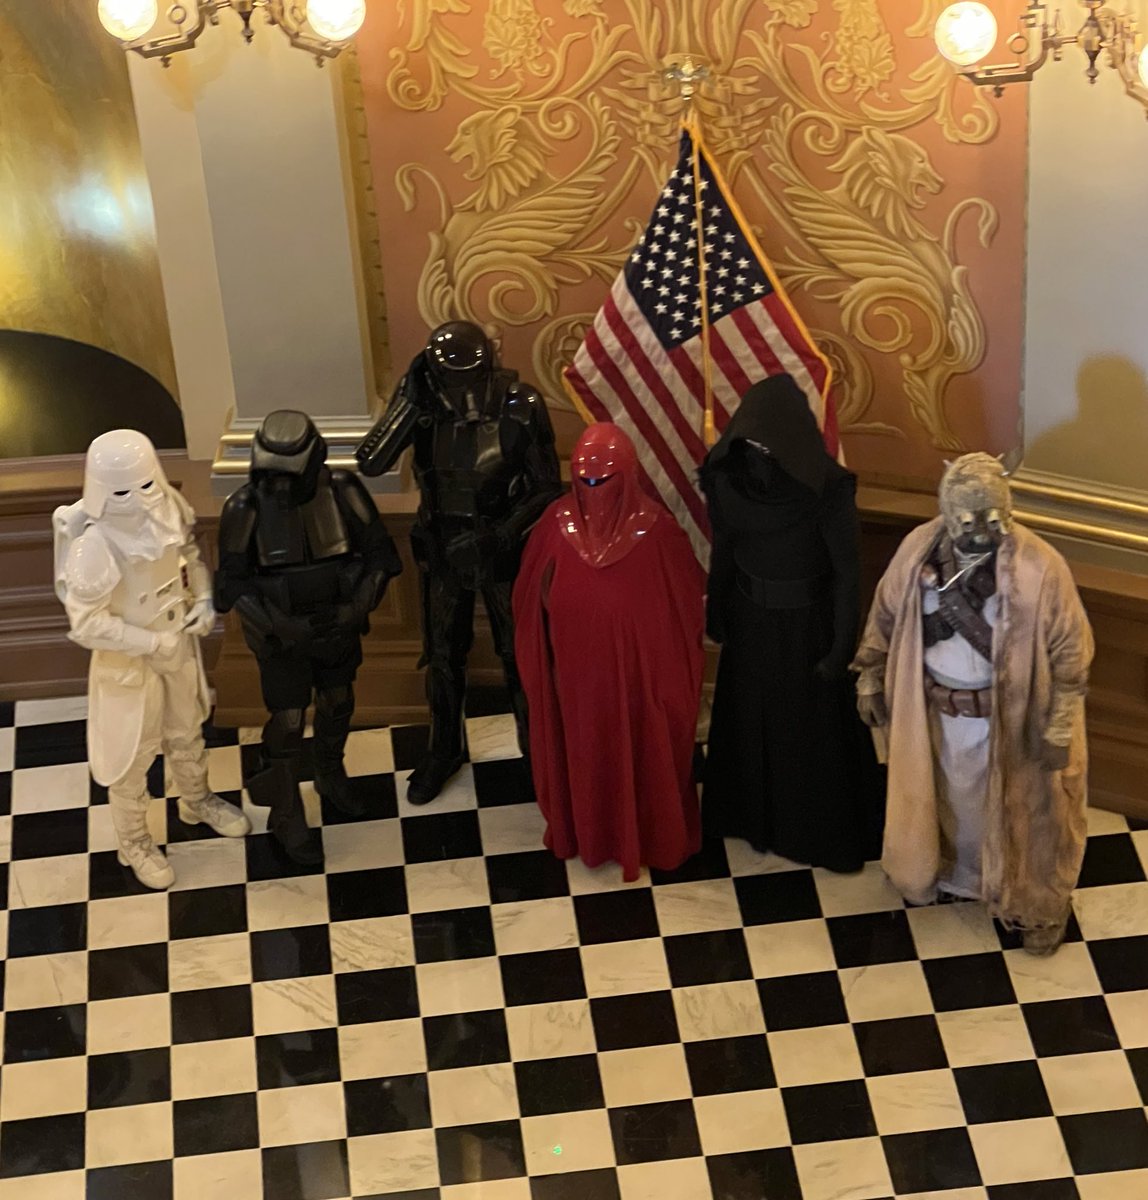 The State Capitol is always full of visitors… but May the 4th brings a few unusual characters. #Maythe4bewithyou #California #StateCapitol #StarWars